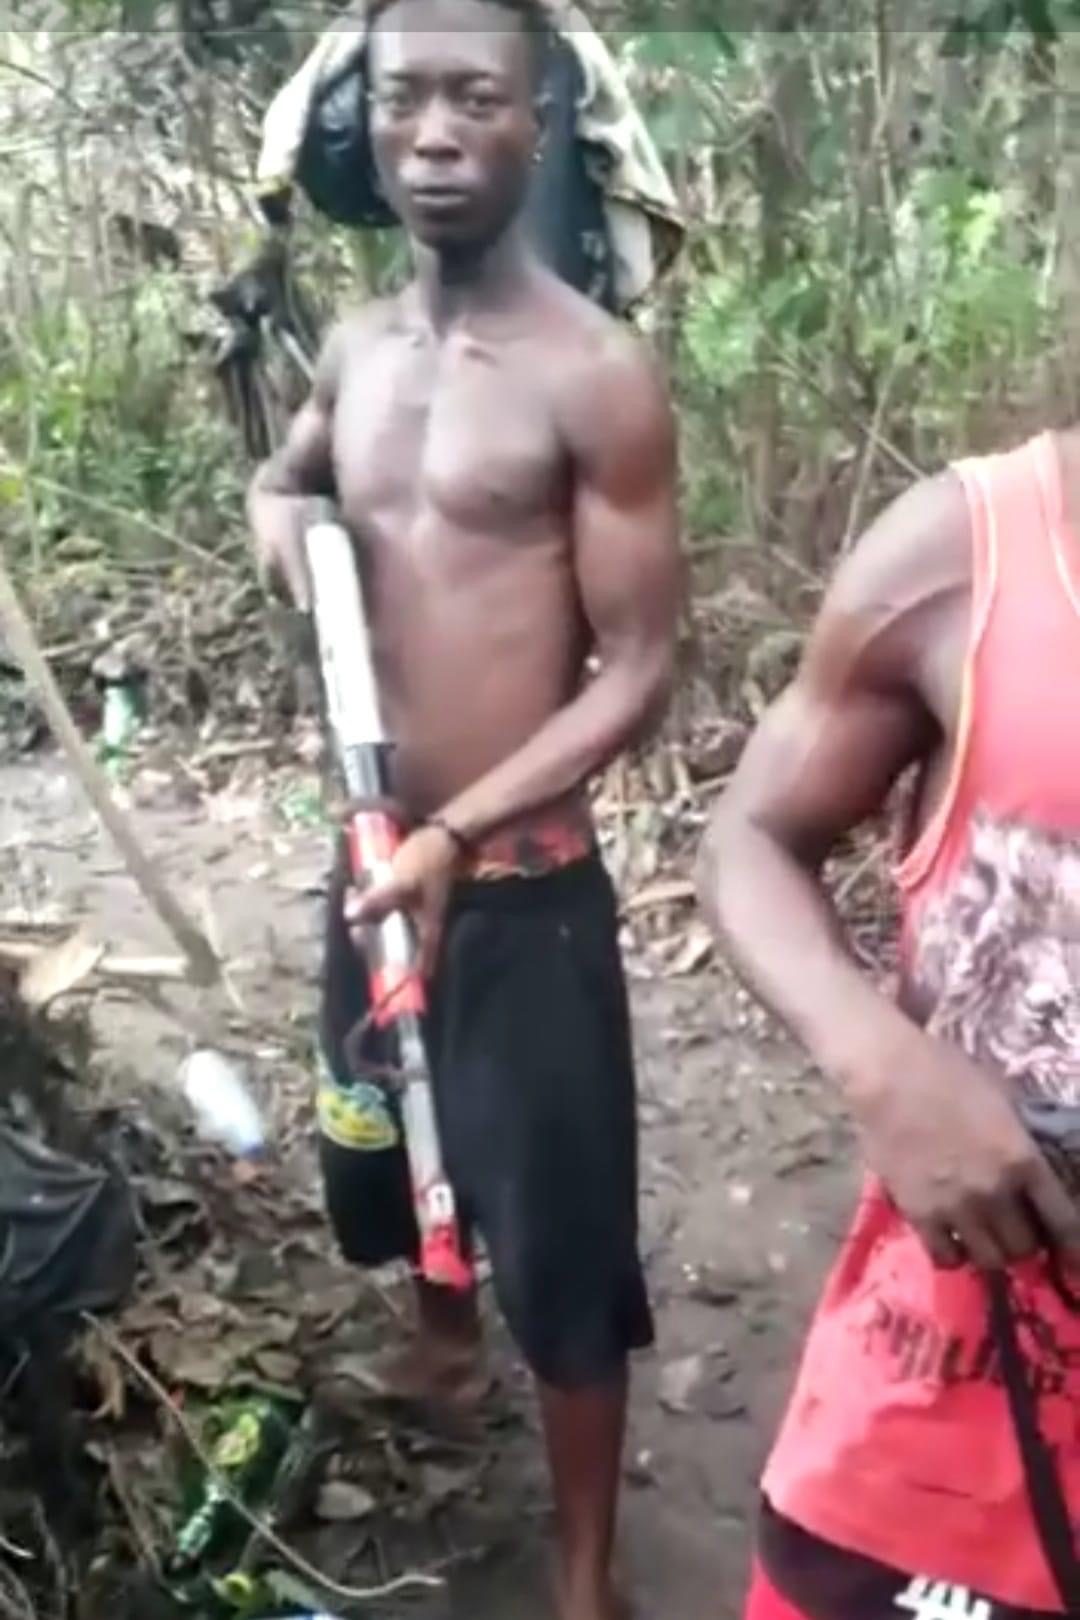 Police Reacts On Arrest Of Gang Members Responsible For The Killing Of DPO In Ahoada: